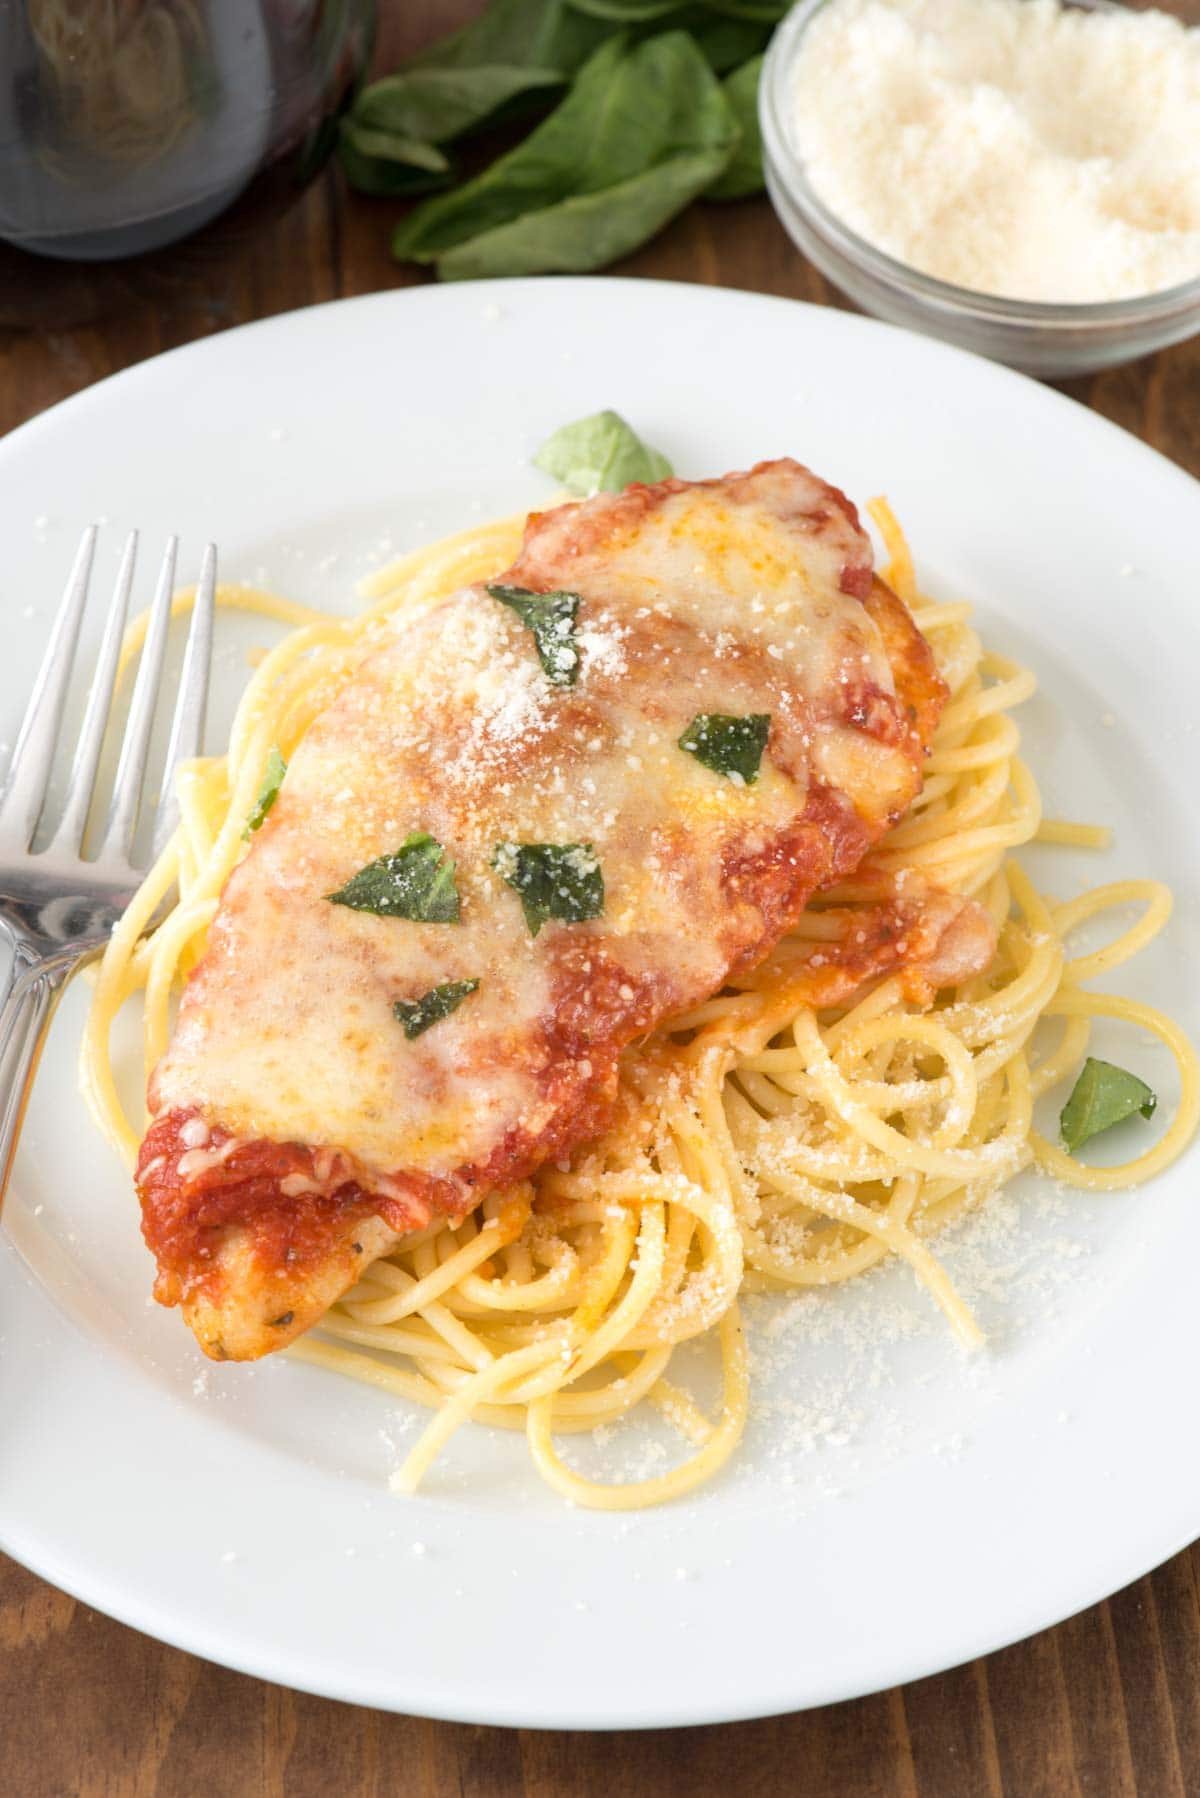 Easy Chicken Parmesan - this quick dinner recipe is totally foolproof. The chicken comes out moist every time! It's the BEST chicken parmesan recipe we've ever had.